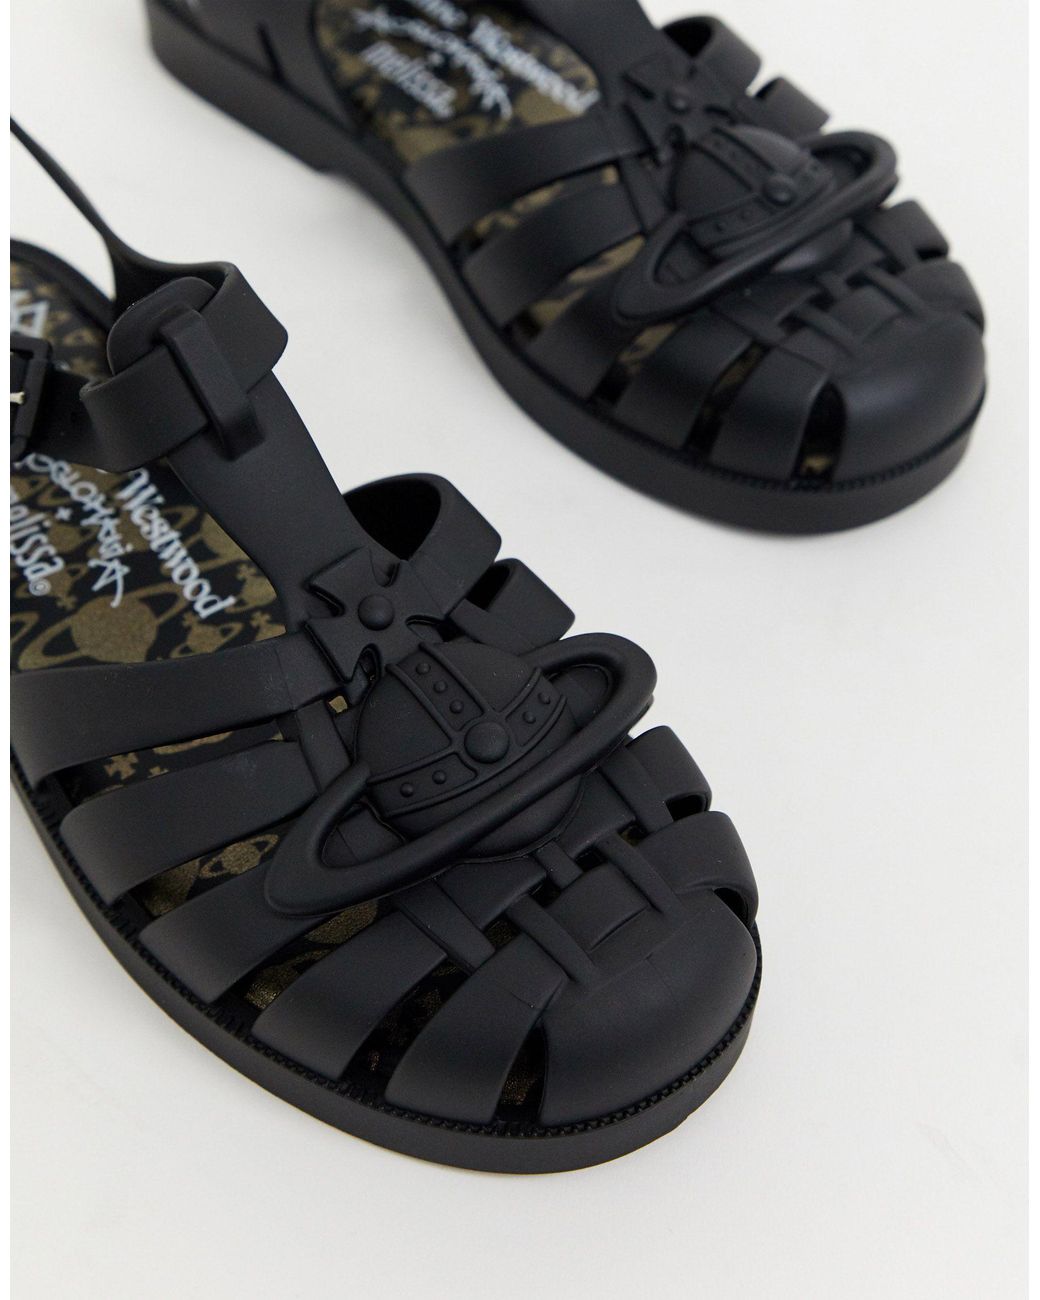 Melissa + Vivienne Westwood Anglomania Logo Trim Jelly Sandals in Black |  Lyst